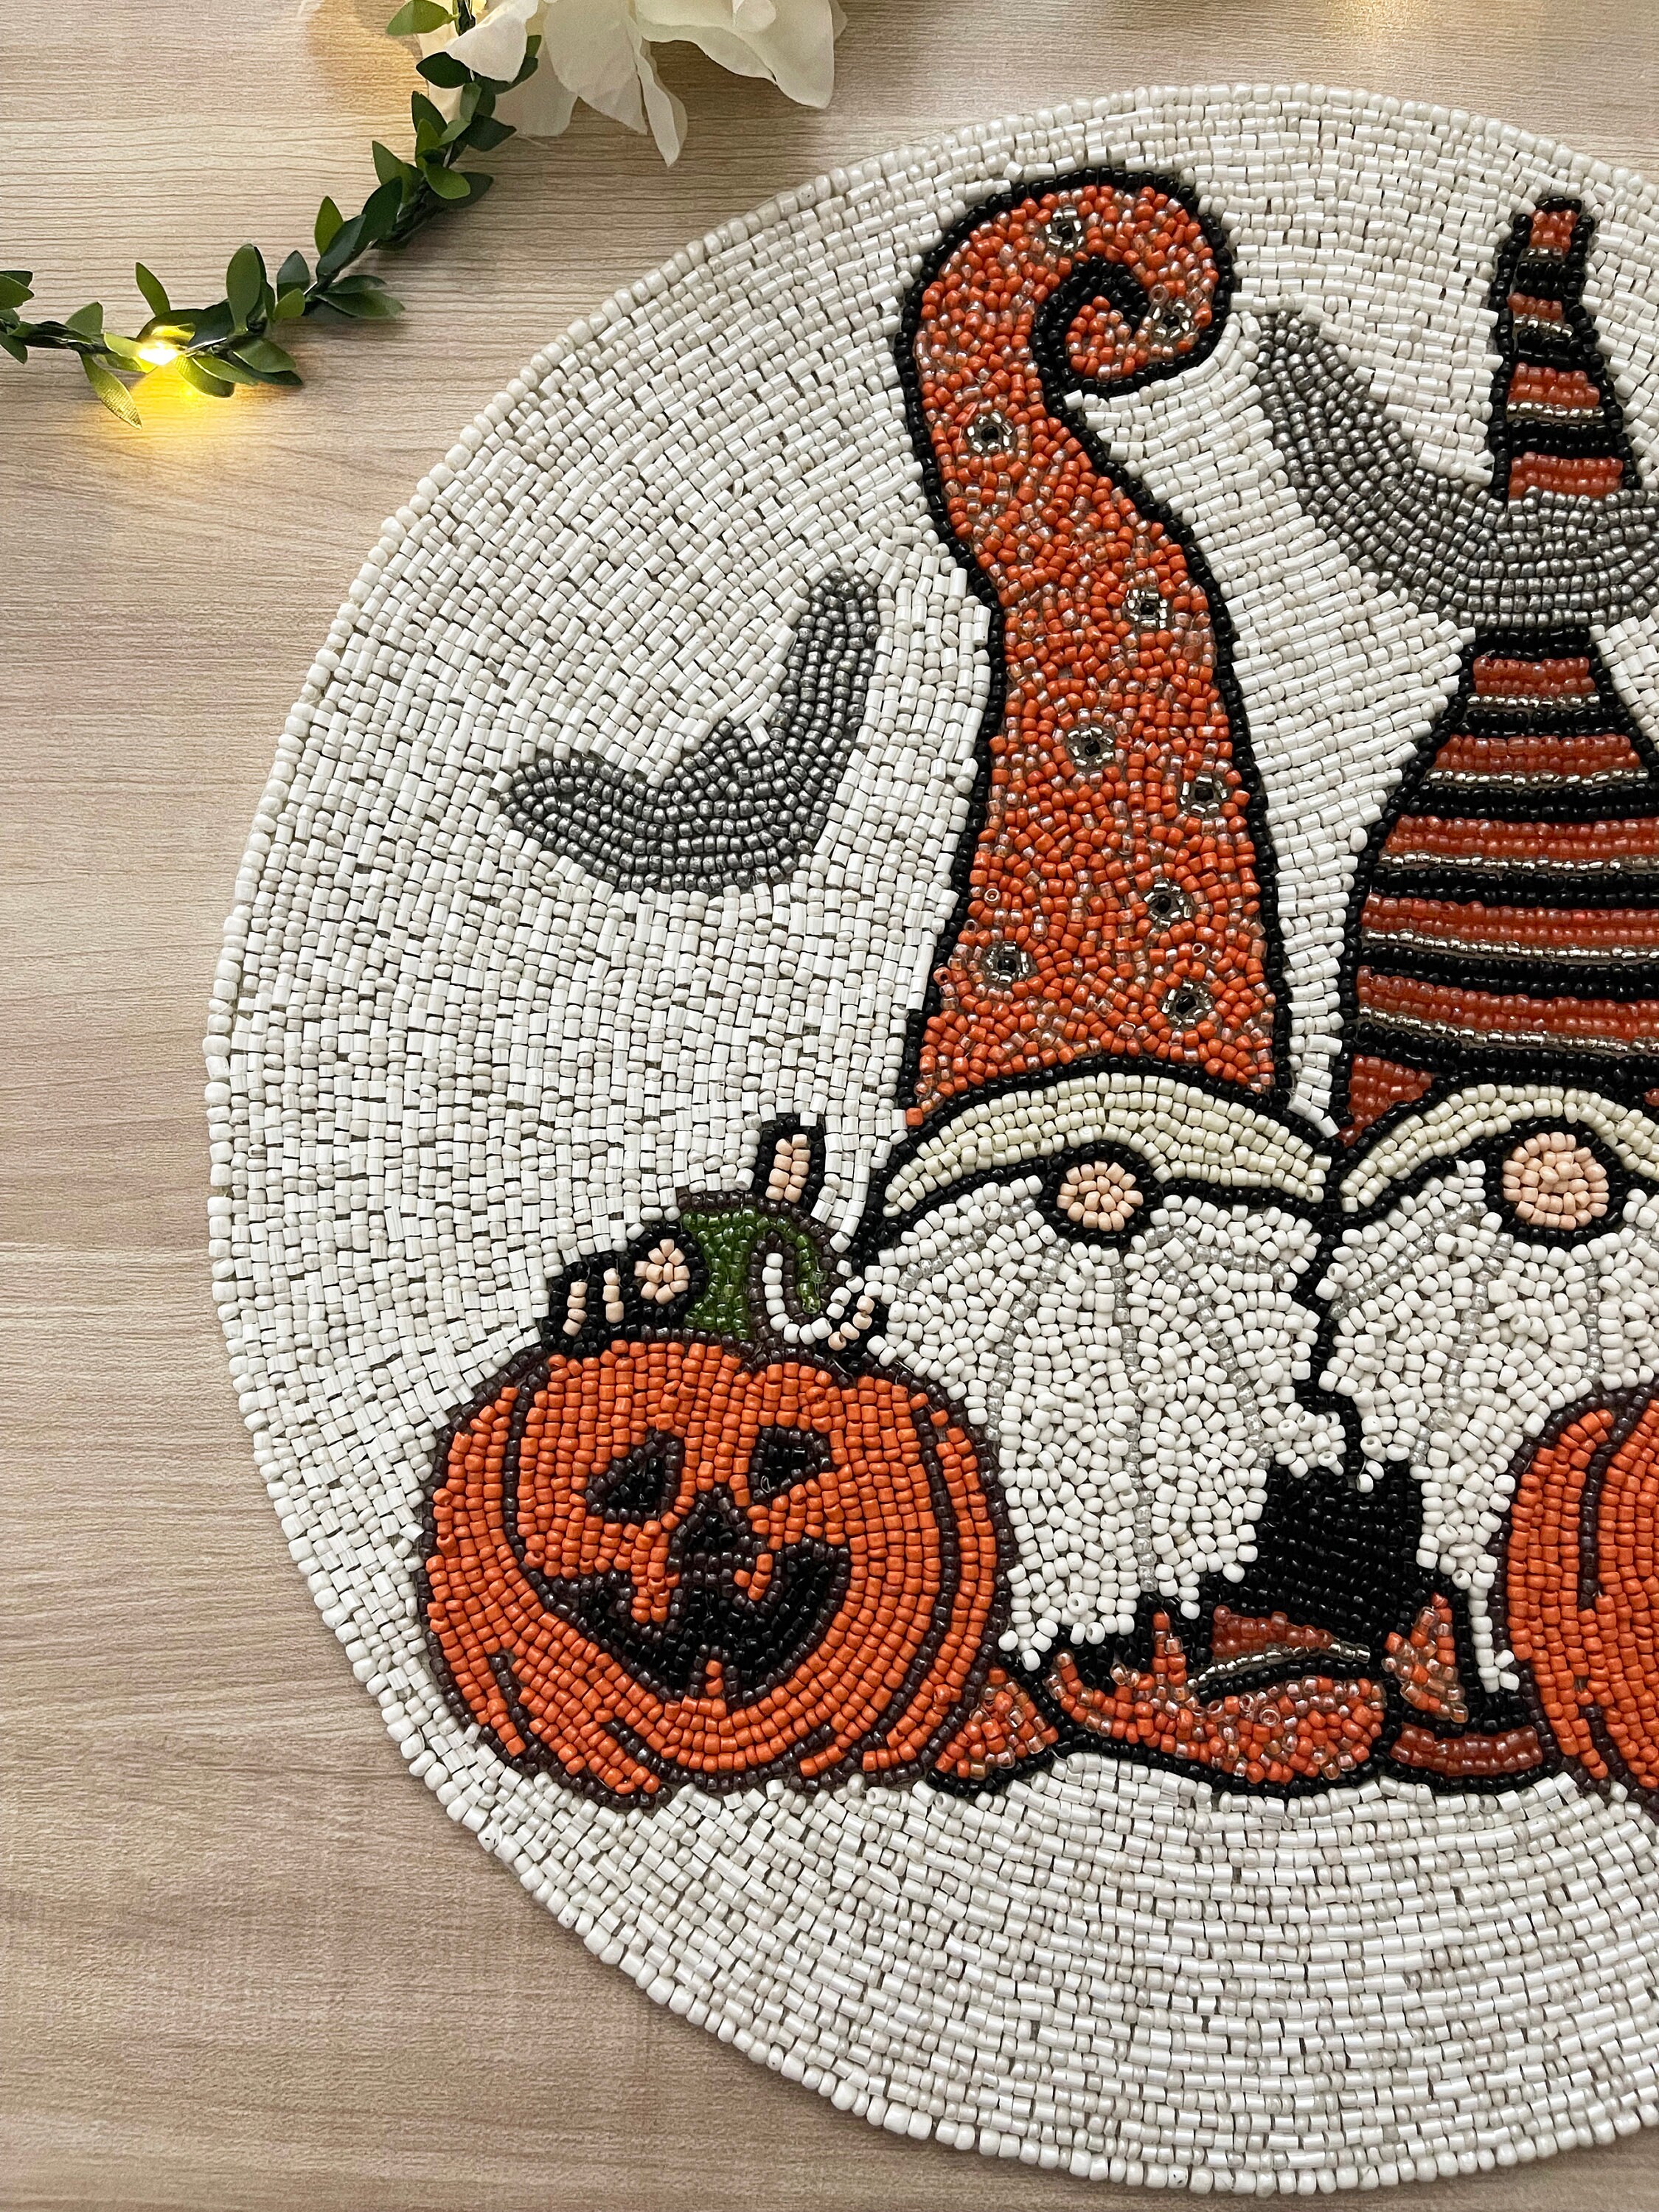 Halloween Handmade Beaded Placemat Tablemat 14 Inch - Etsy